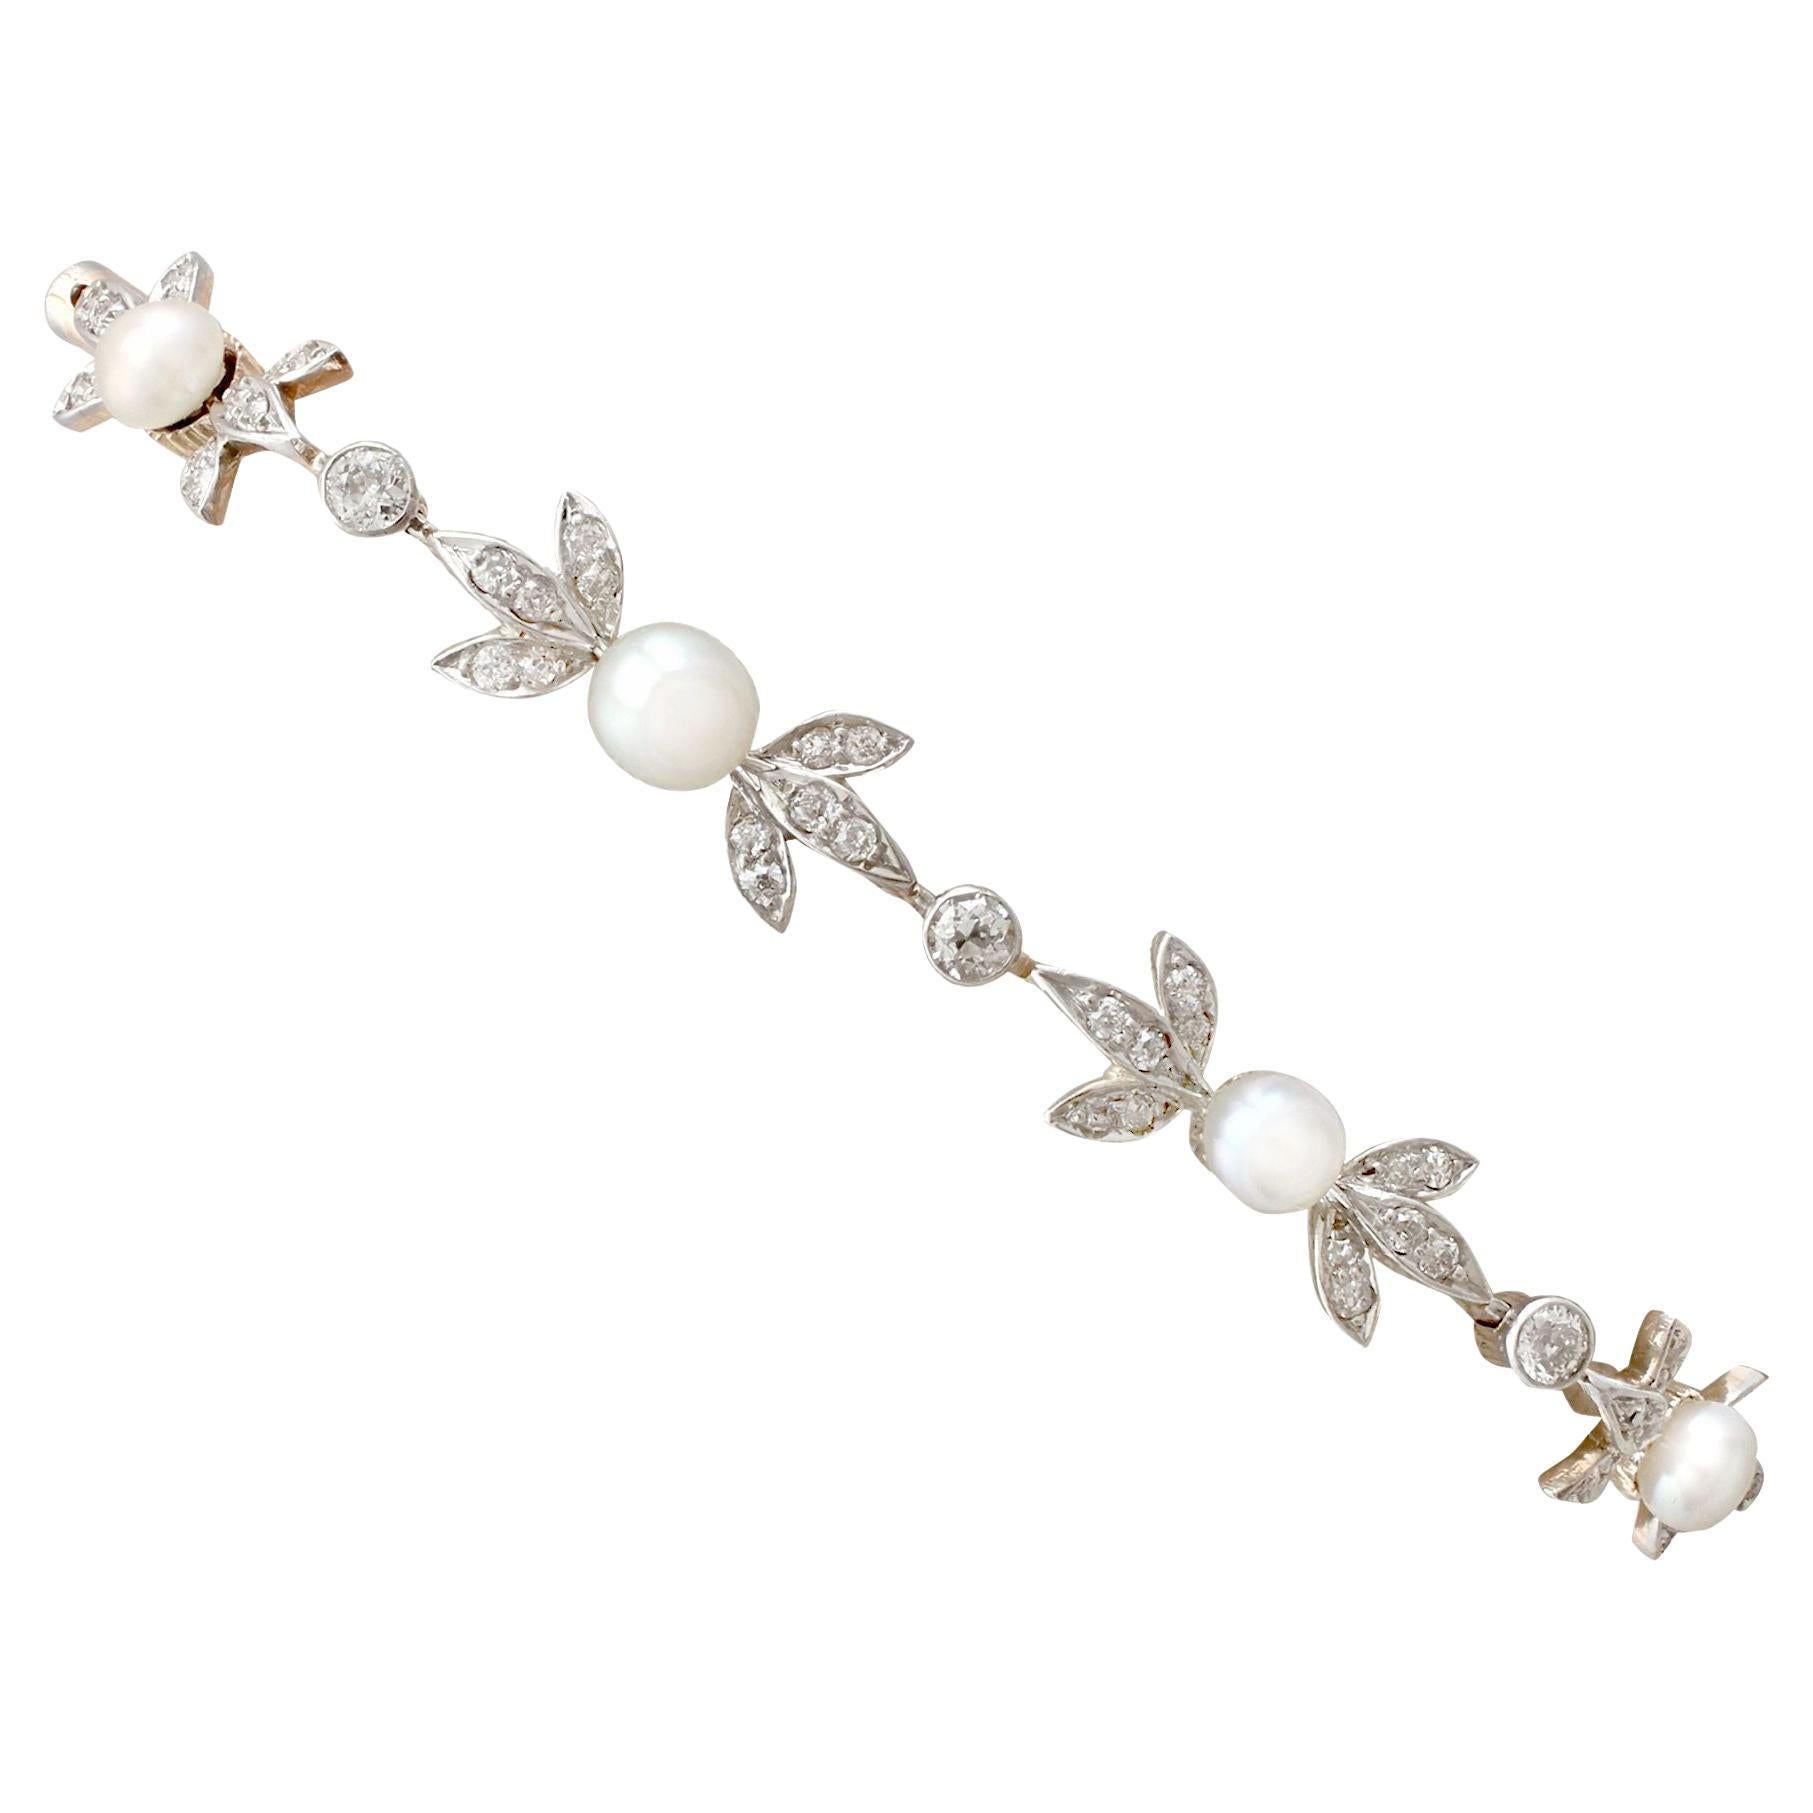 Antique 1.42 Carat Diamond and Natural Pearl Yellow Gold Bracelet, circa 1910 For Sale